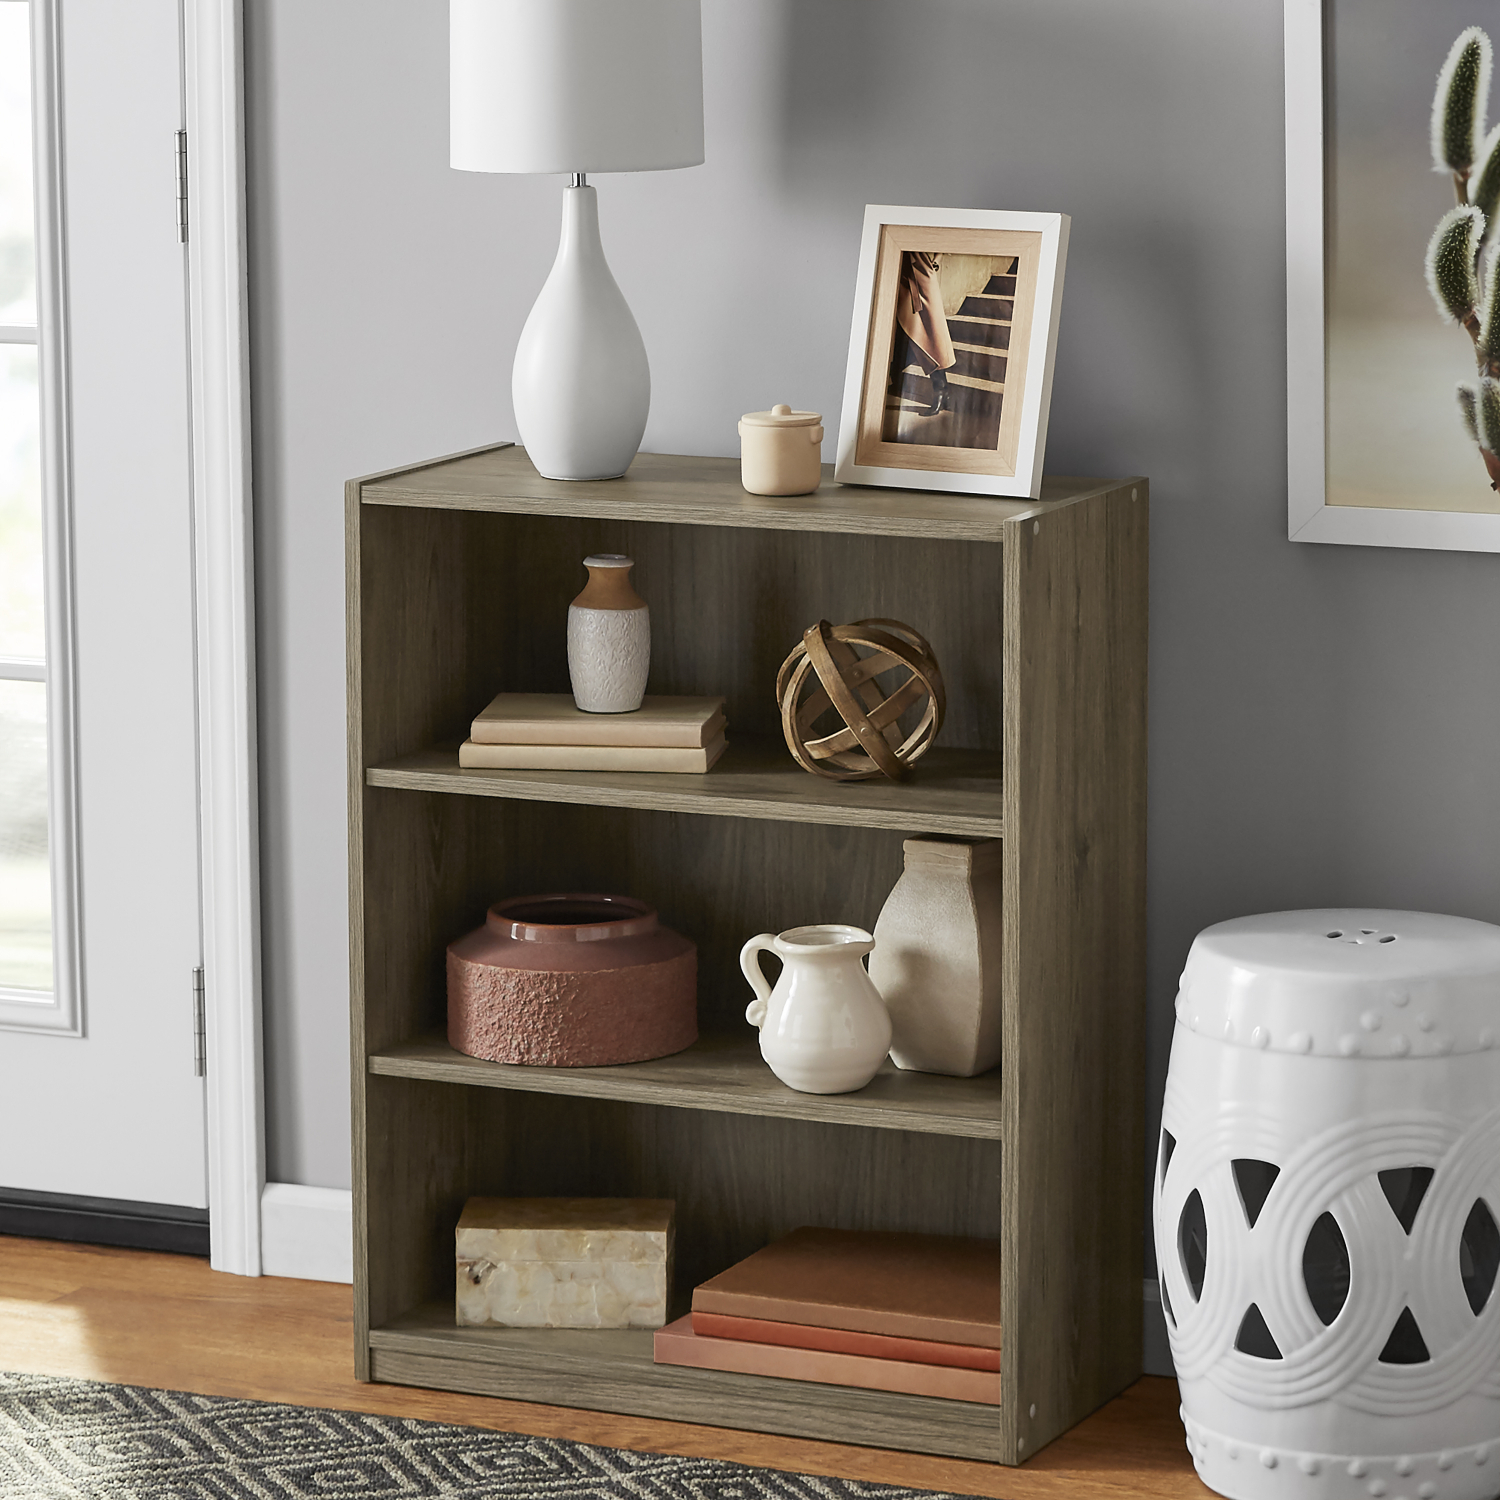 Details About Rustic Oak Wood Shelf Bookcase W 3 Shelves Home Storage Organizer Furniture within proportions 1500 X 1500